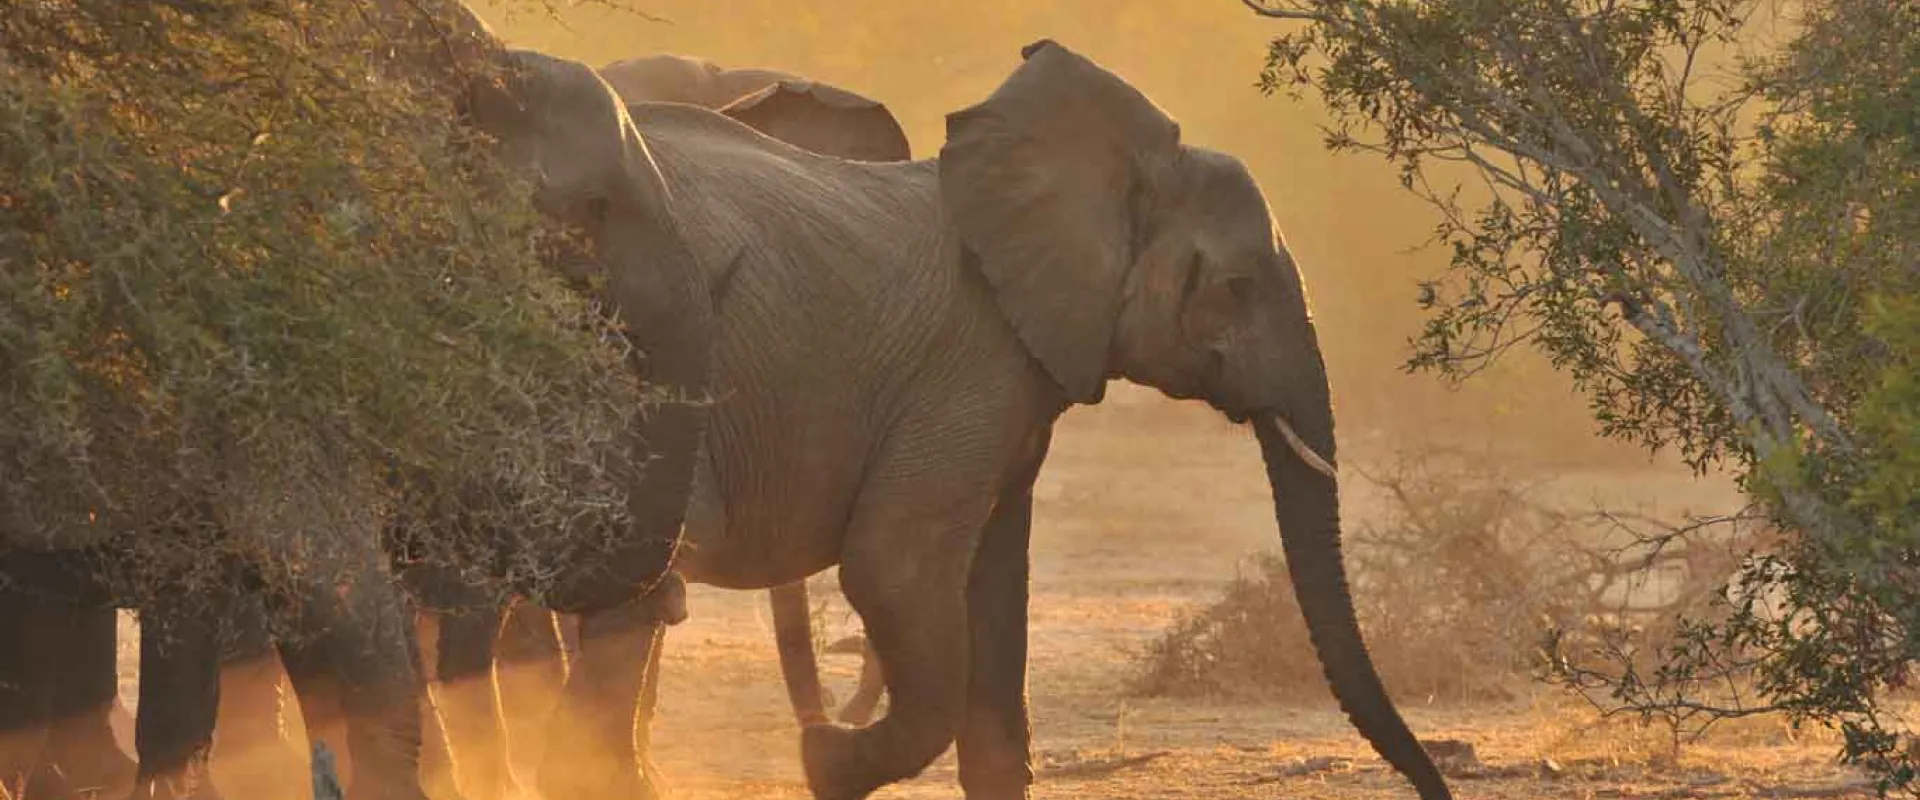 Our Long-Term Commitment to Elephant Conservation